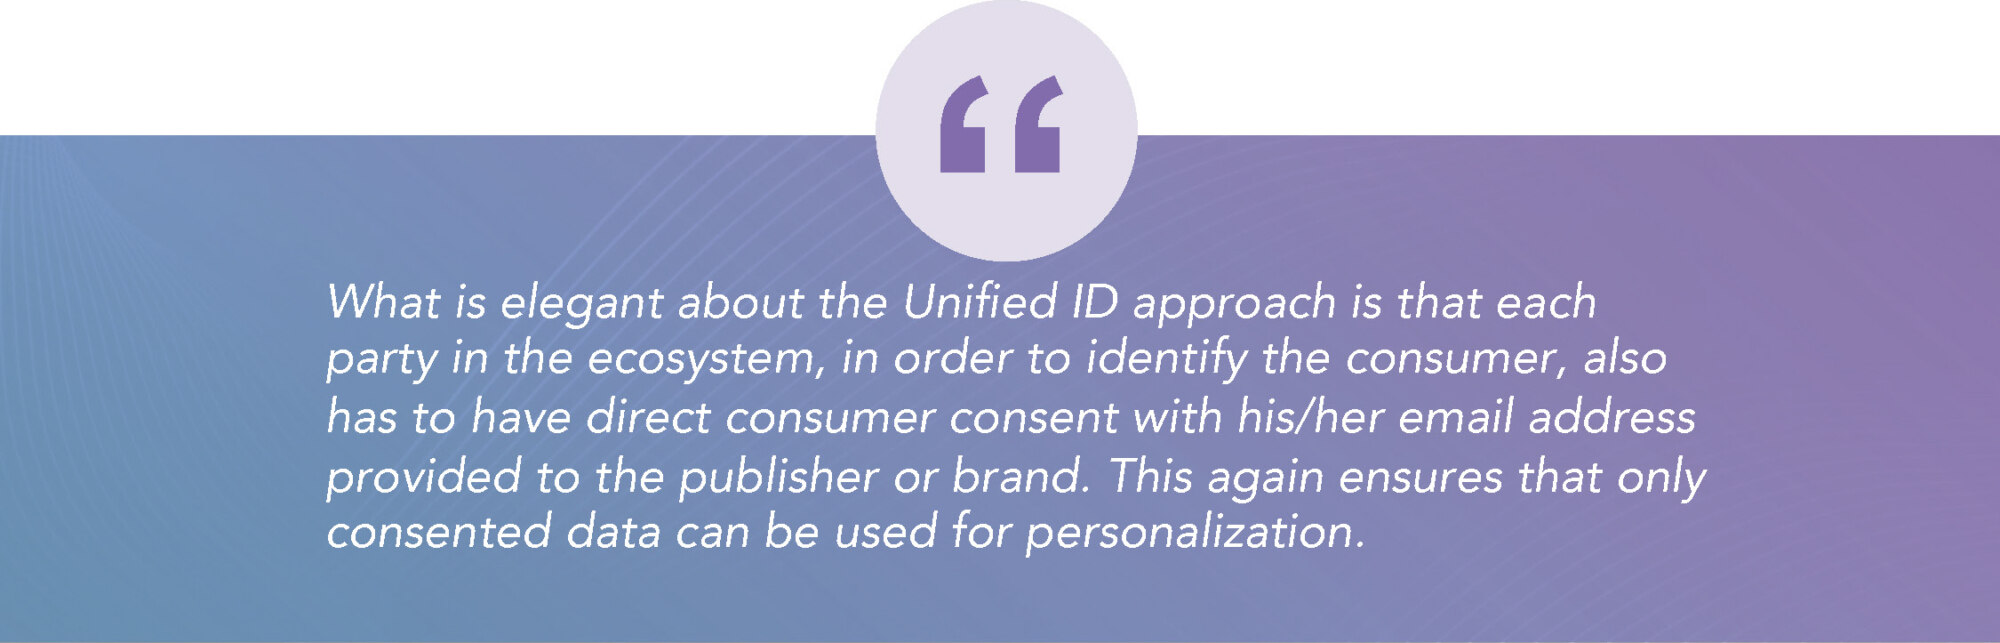 Unified ID approach